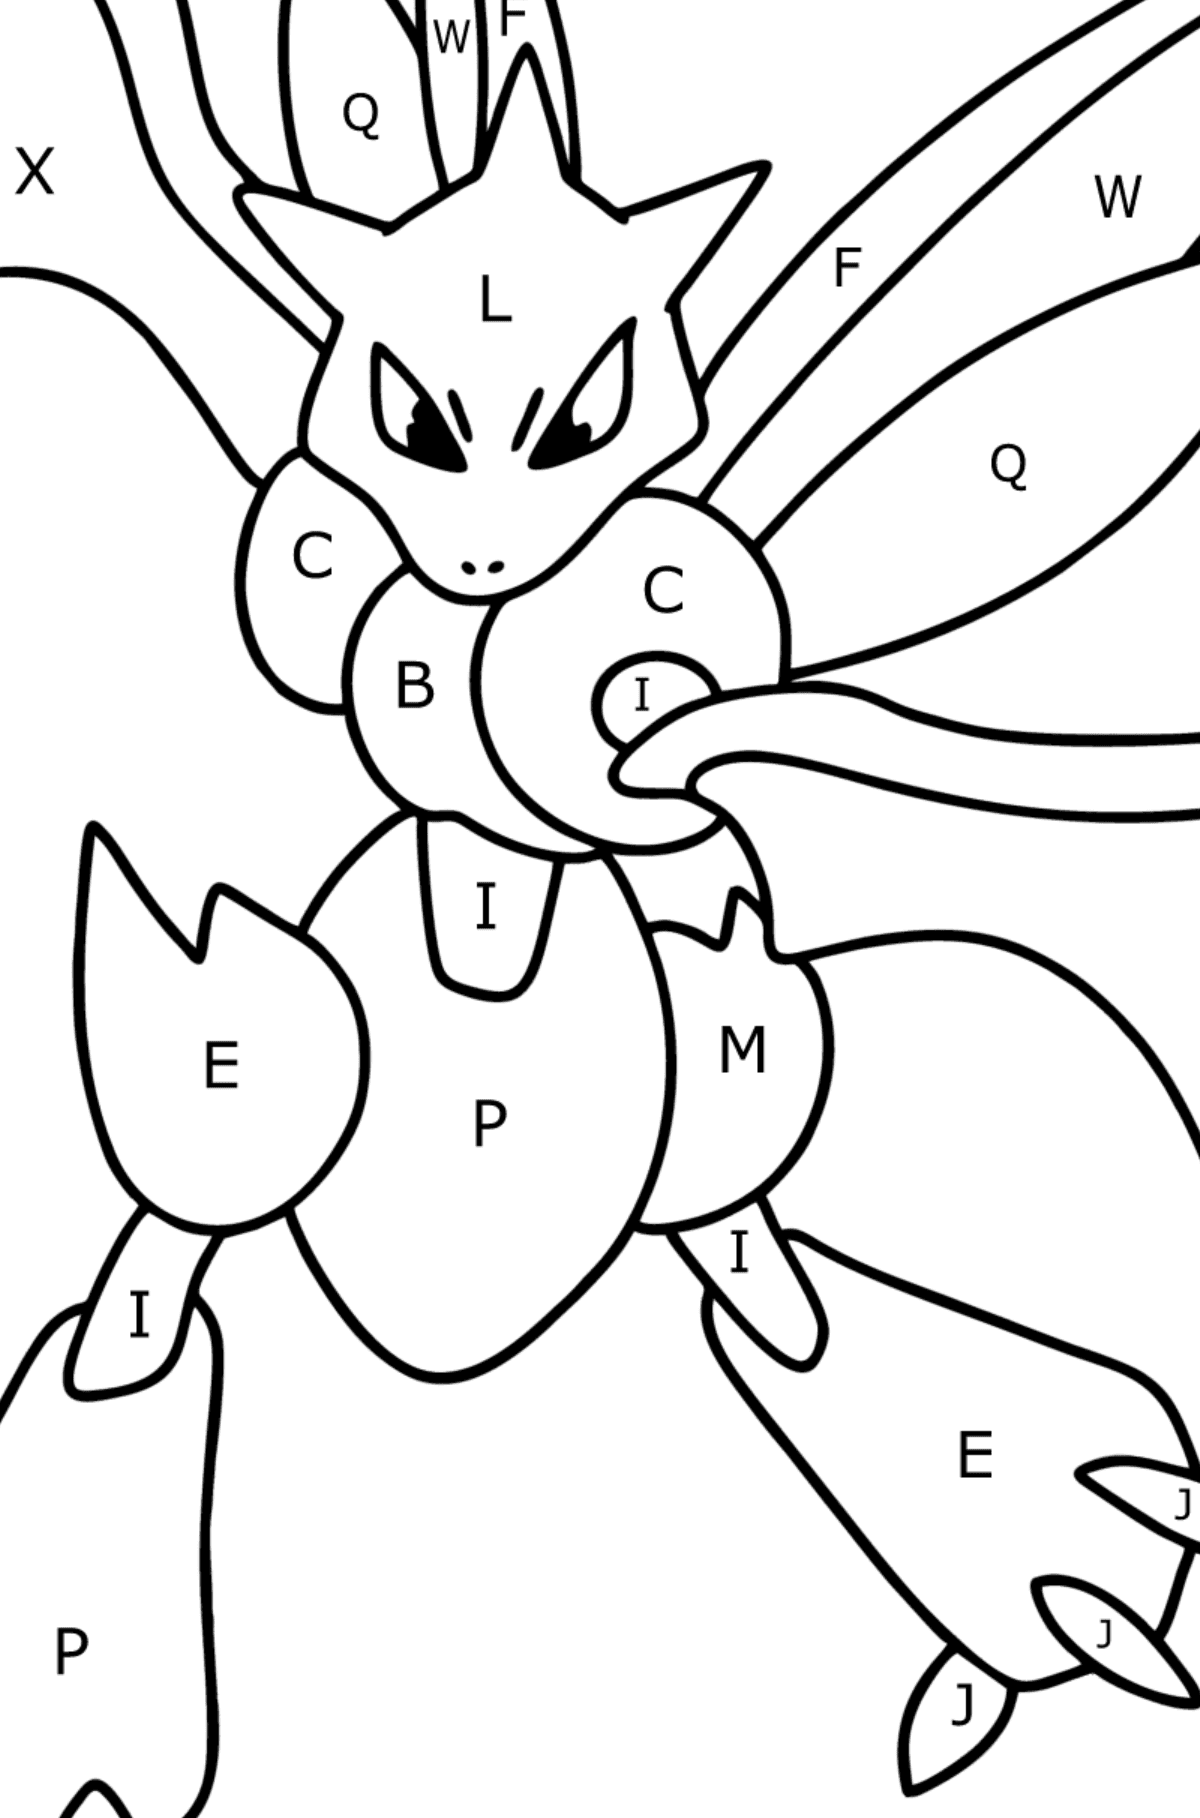 Coloring page Pokemon Go Scyther - Coloring by Letters for Kids